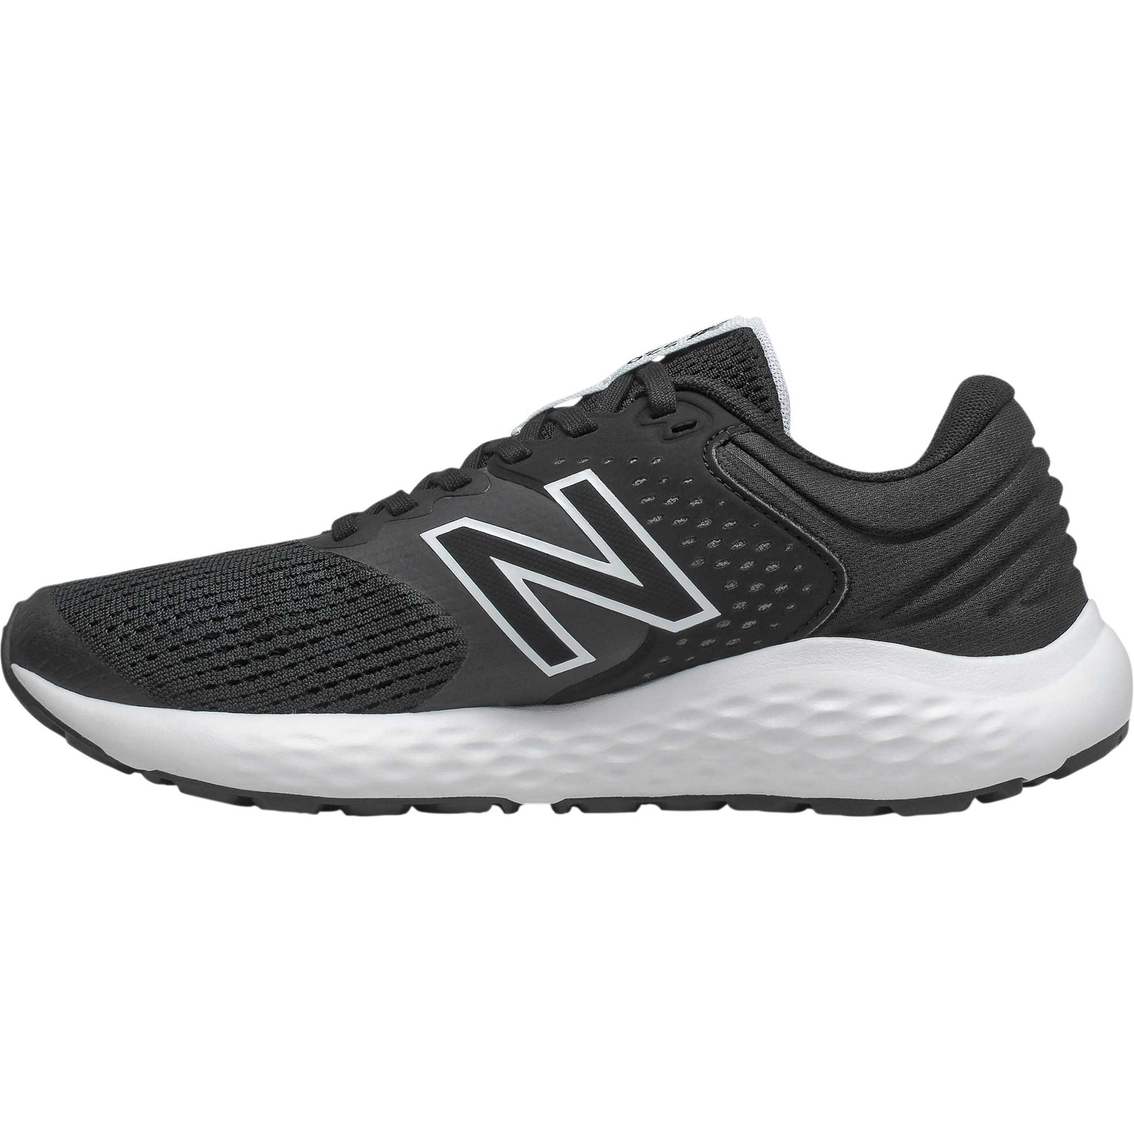 New Balance Women's W520lk7 Running Shoes | Women's Athletic Shoes ...